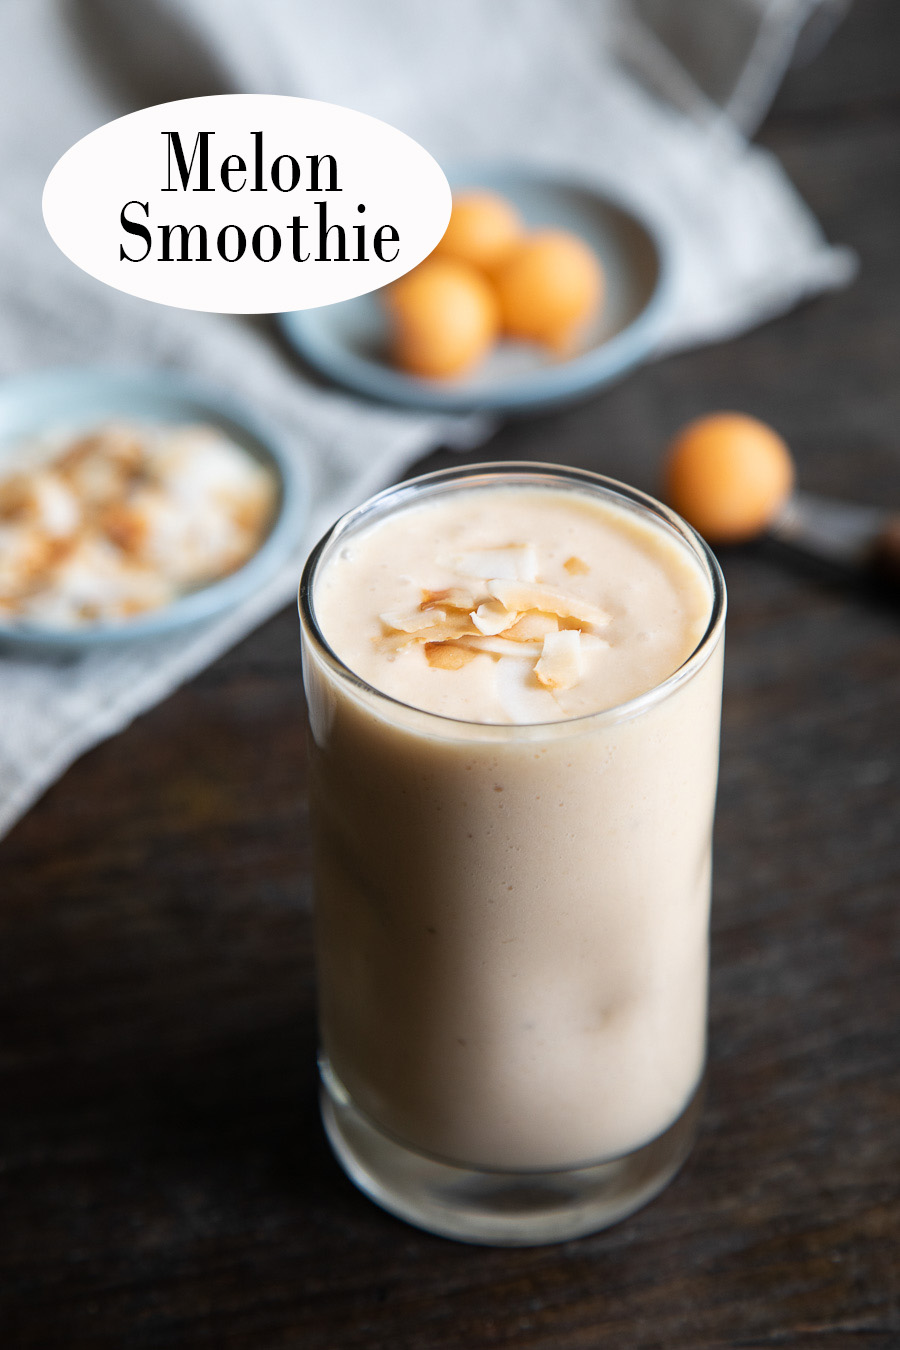 This melon smoothie is perfect for summer fruits. Start your day or refresh your afternoon with this cantaloupe smoothie recipe. It's <a href=